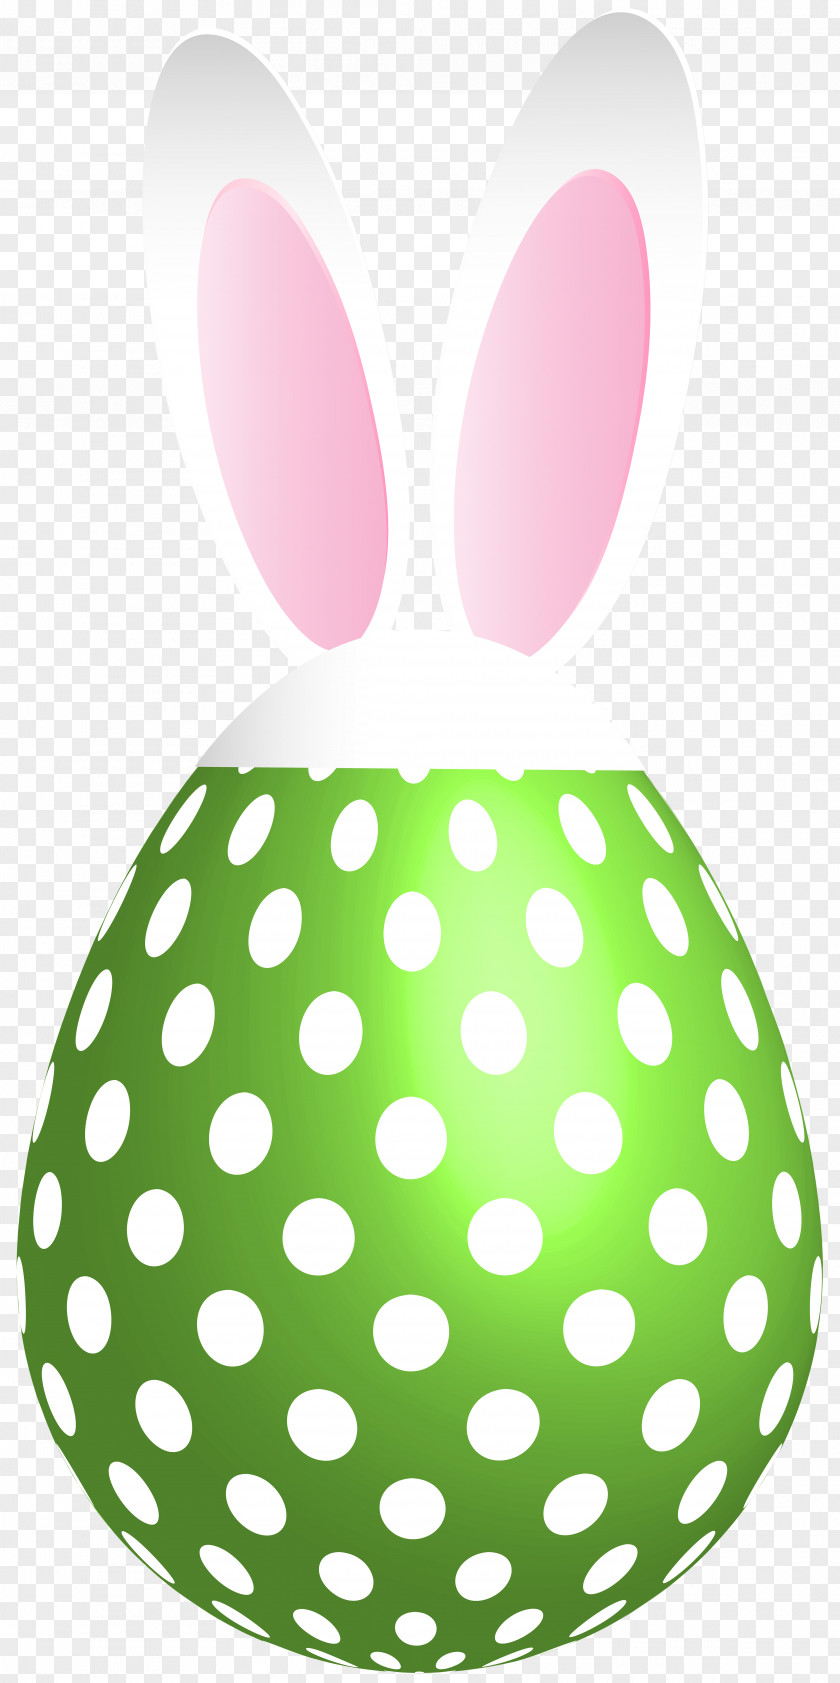 Easter Dotted Bunny Egg Green Transparent Clip Art Image File Formats Lossless Compression PNG